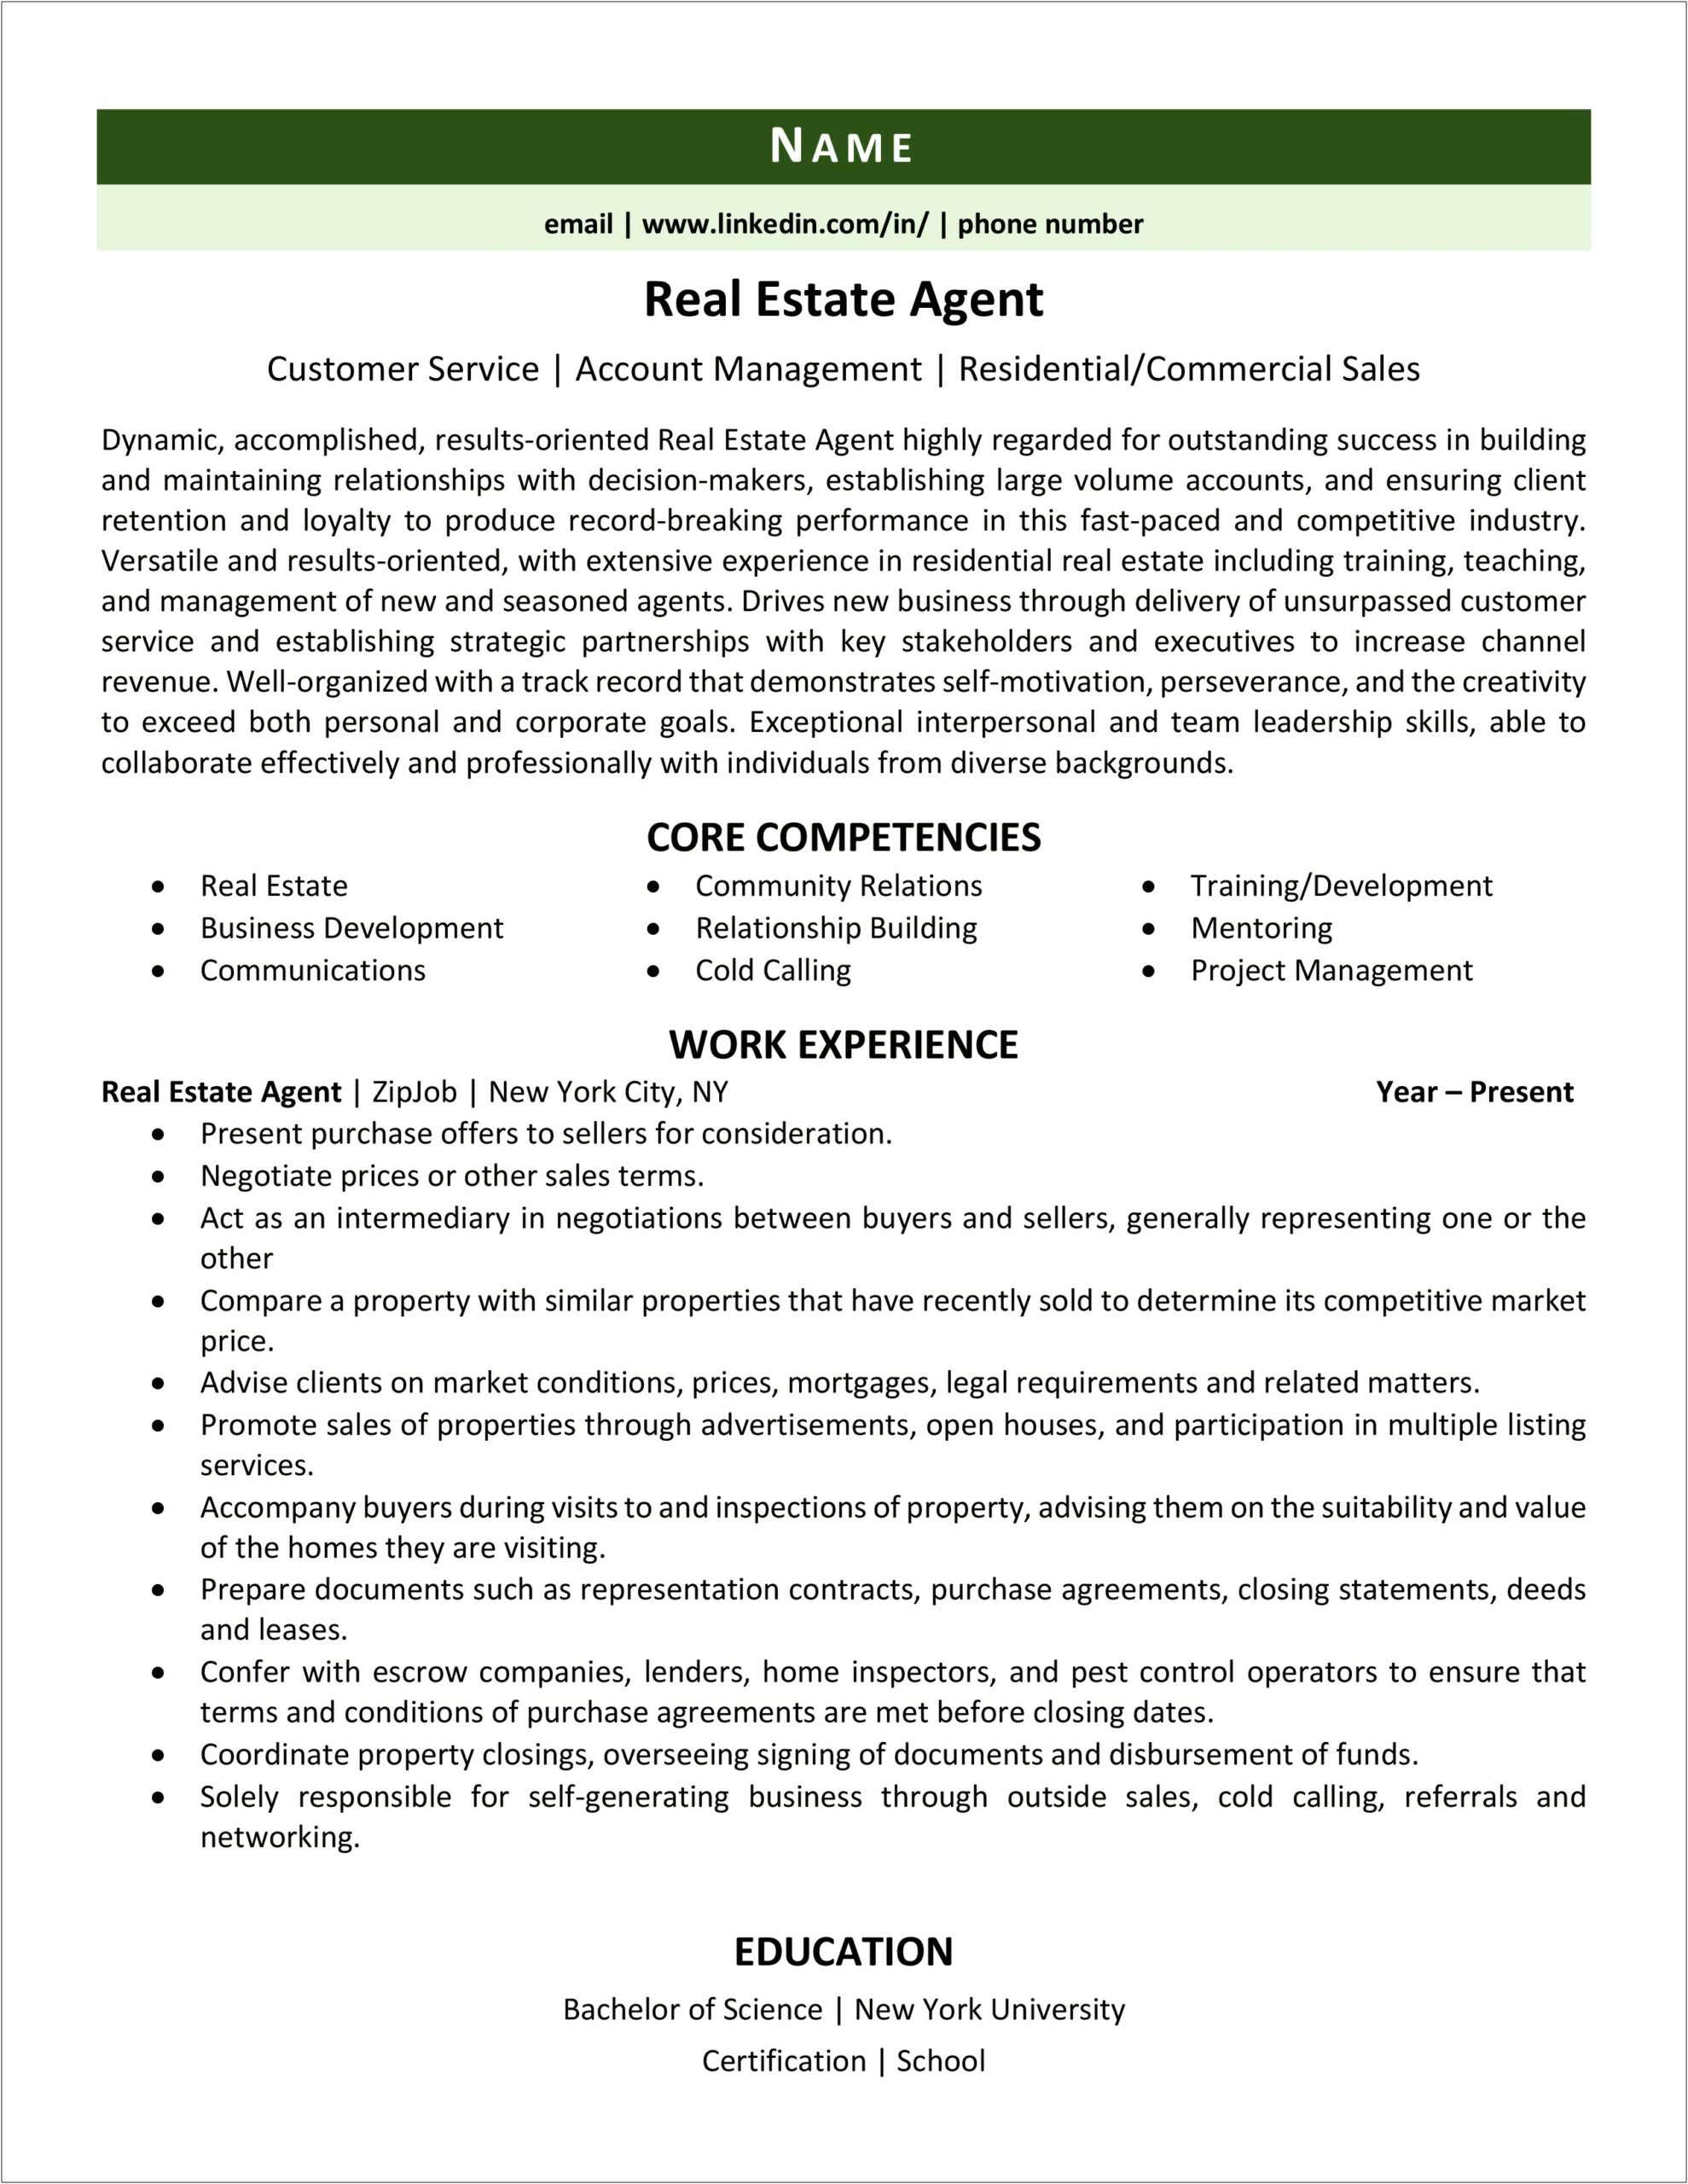 Examples Of Seeking Real Estate Assistant Job Resumes